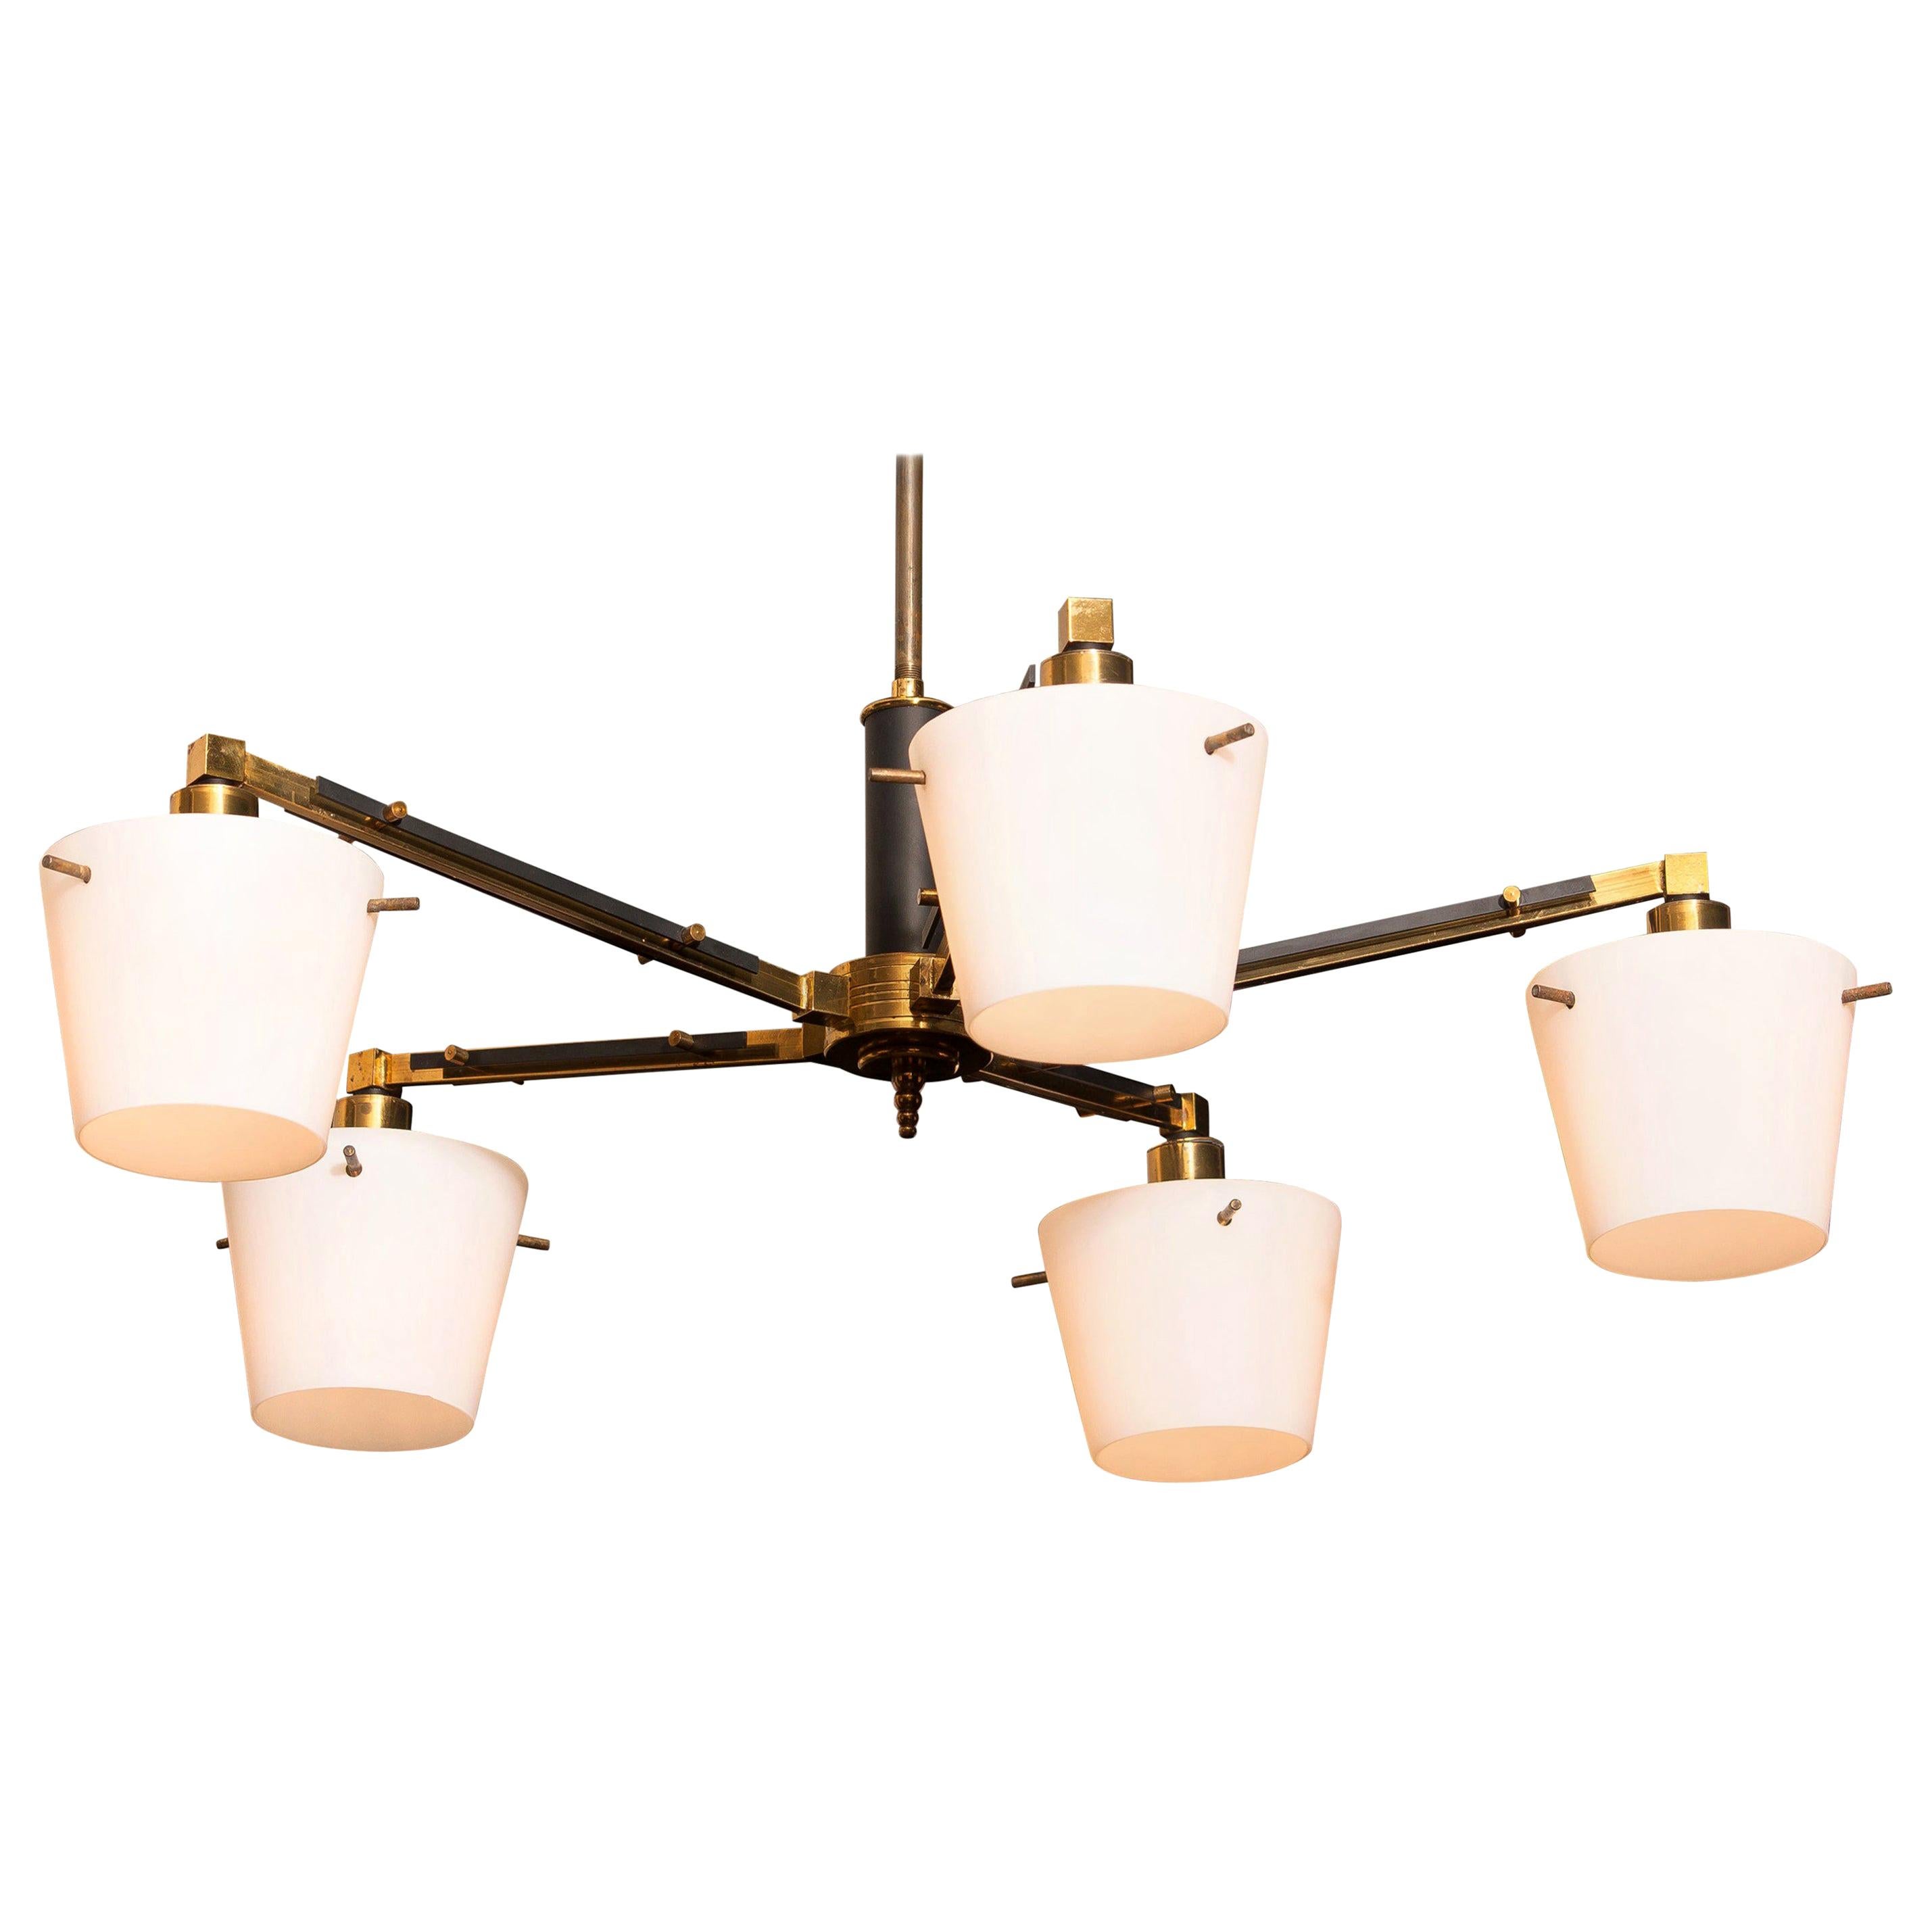 Italian 1950s, Brass Chandelier with Frosted with Glass Shades , Italy